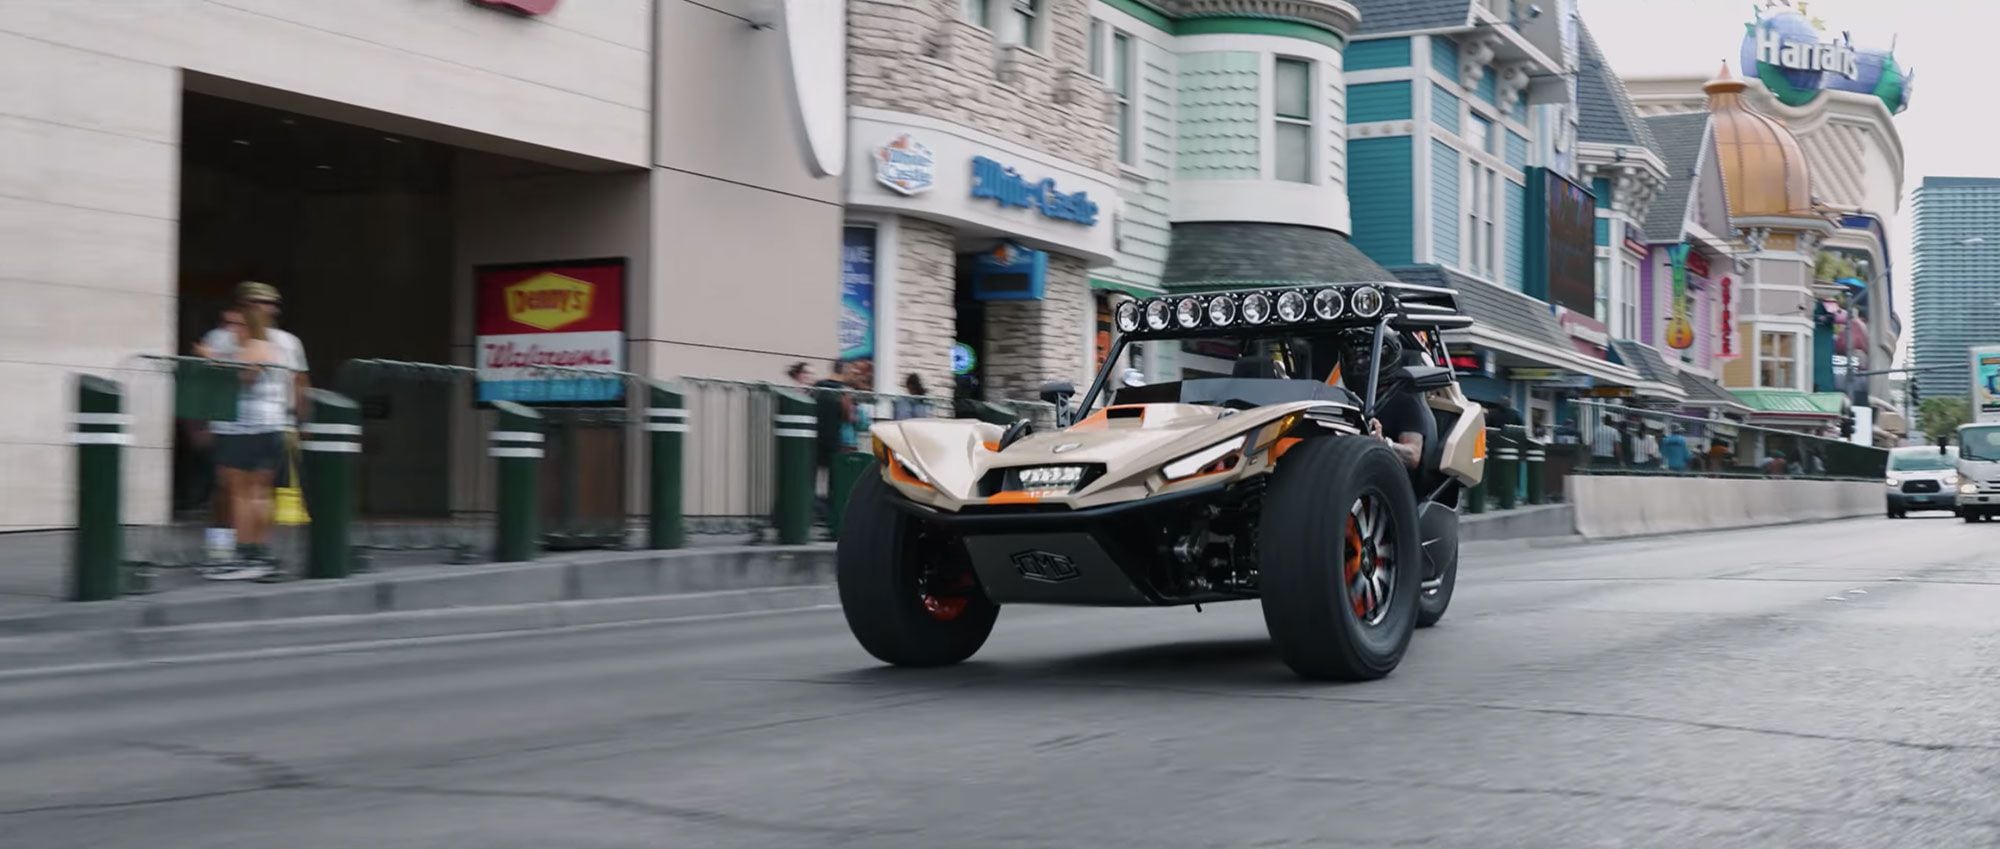 Of all the wild rides cruising the Vegas strip, the Gas Monkey Slingshot is a standout.